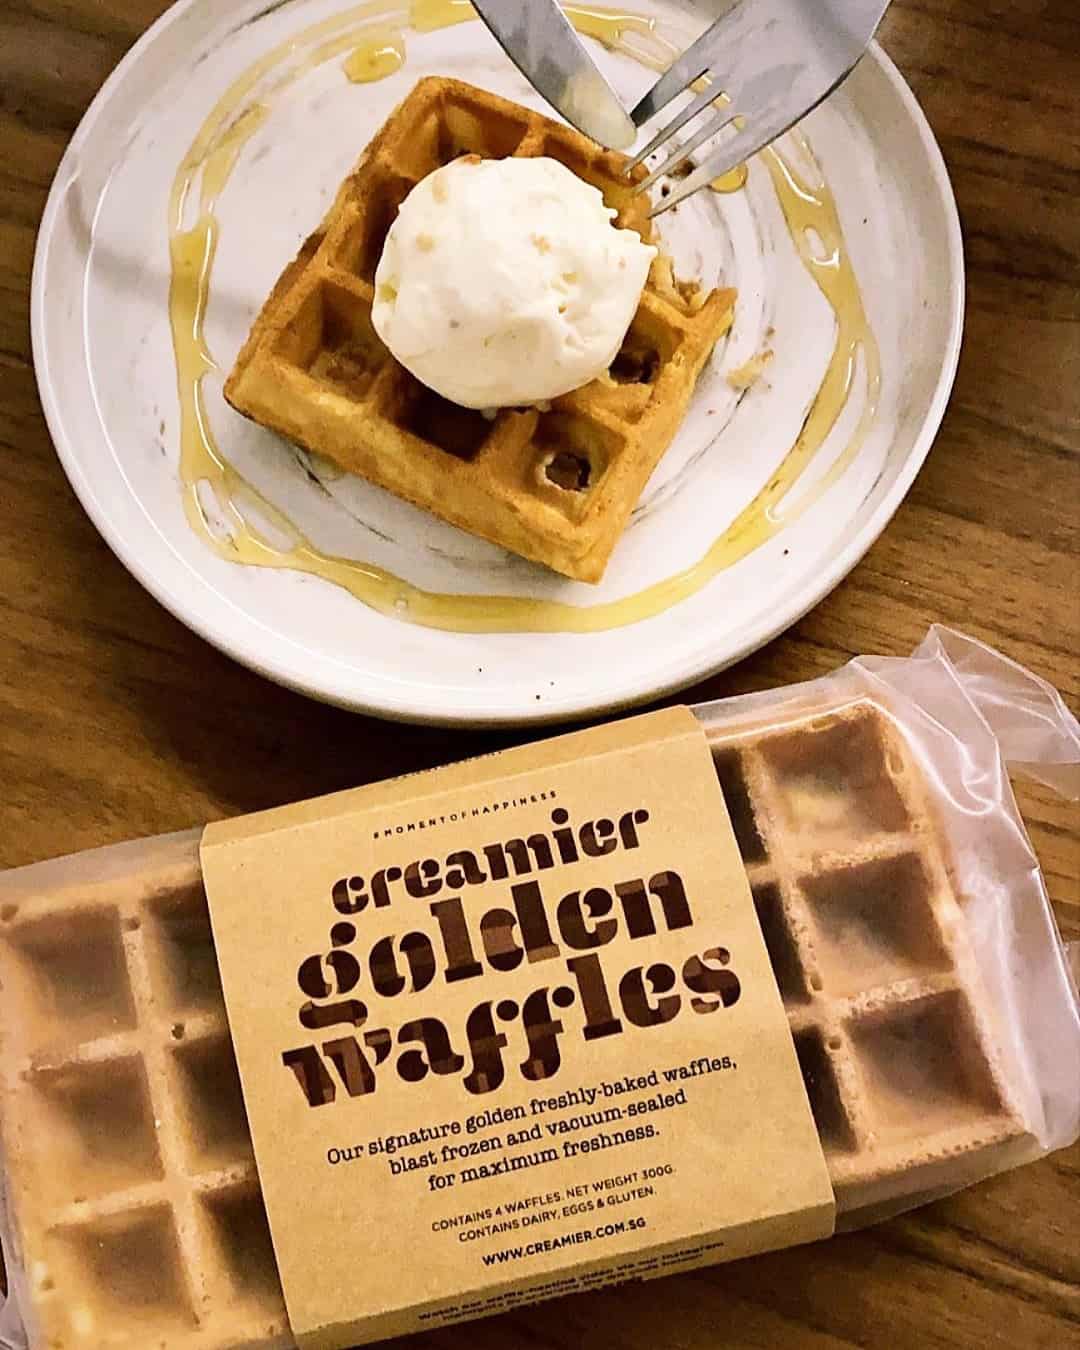 Ice cream delivery waffles creamier